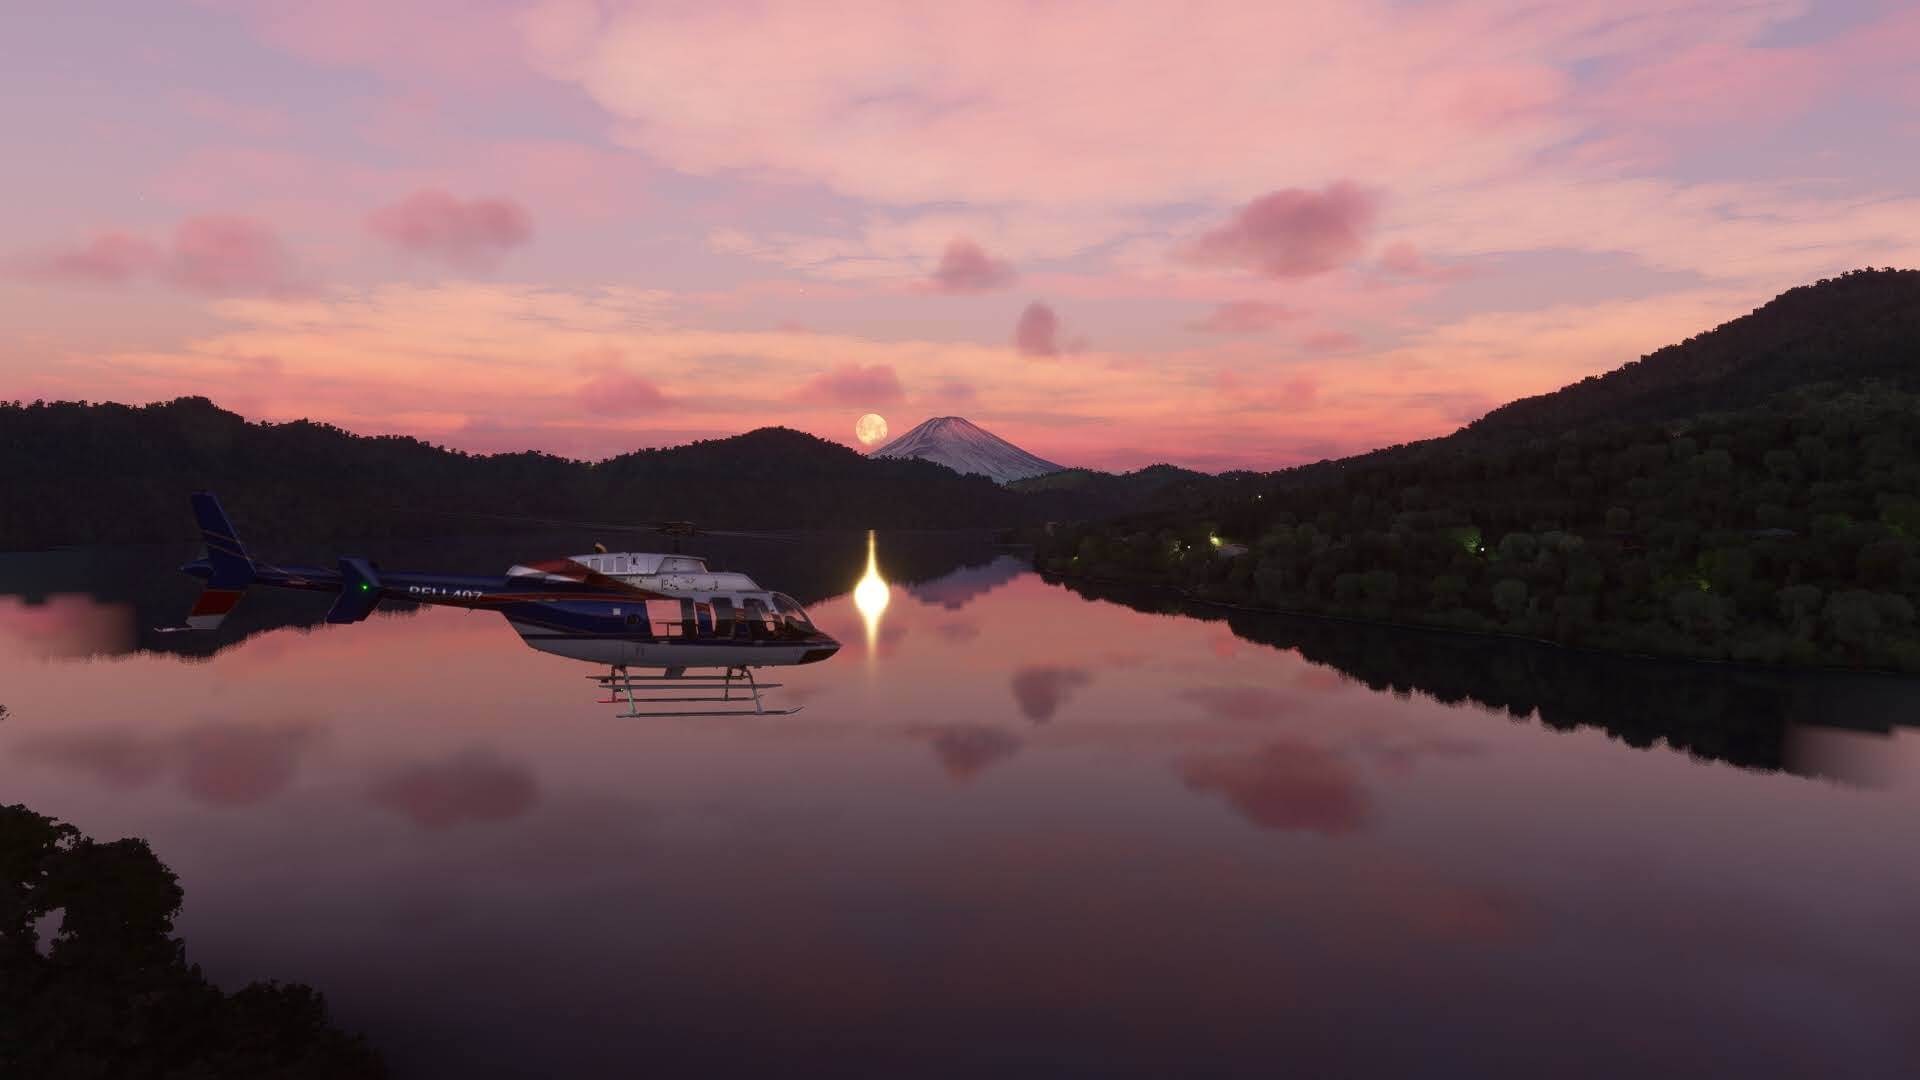 A helicopter flies over a lake at sunset, with Mt. Fuji visible in the distance.